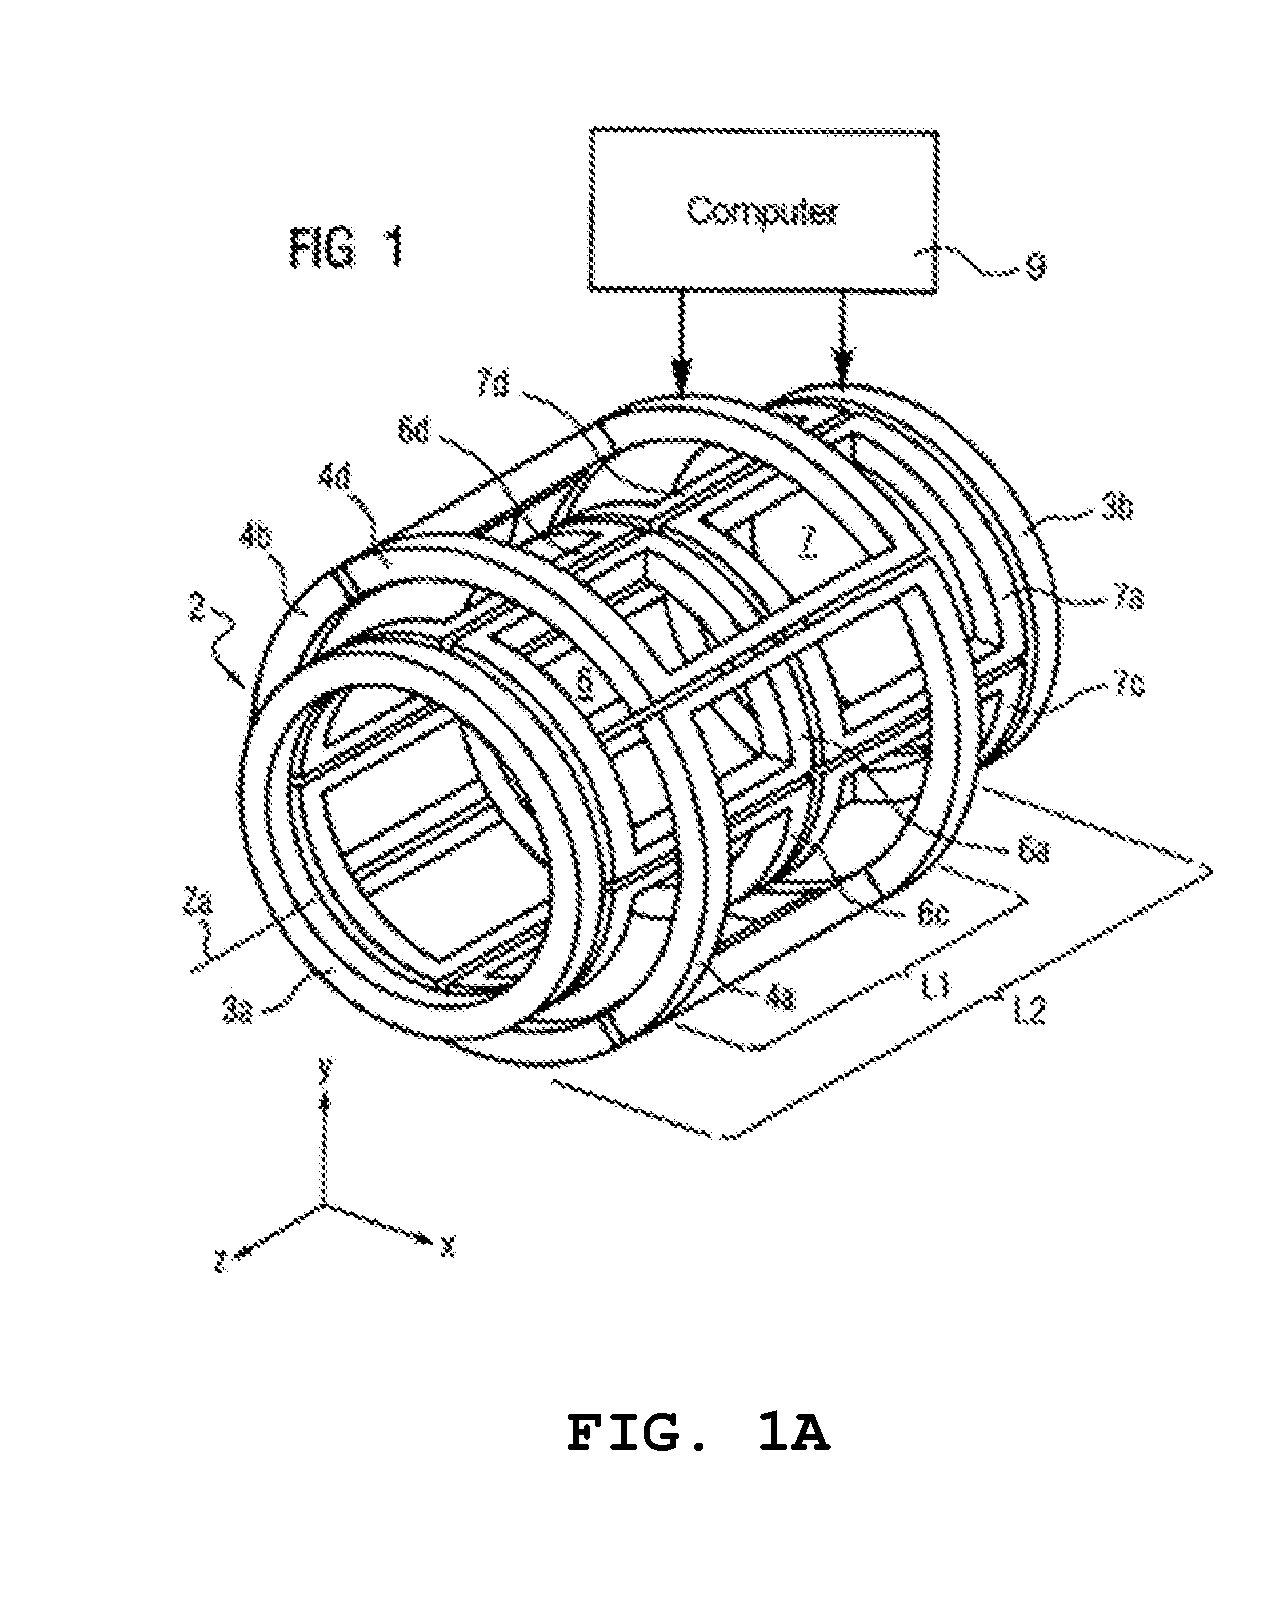 Actuation control system of a capsule endoscope